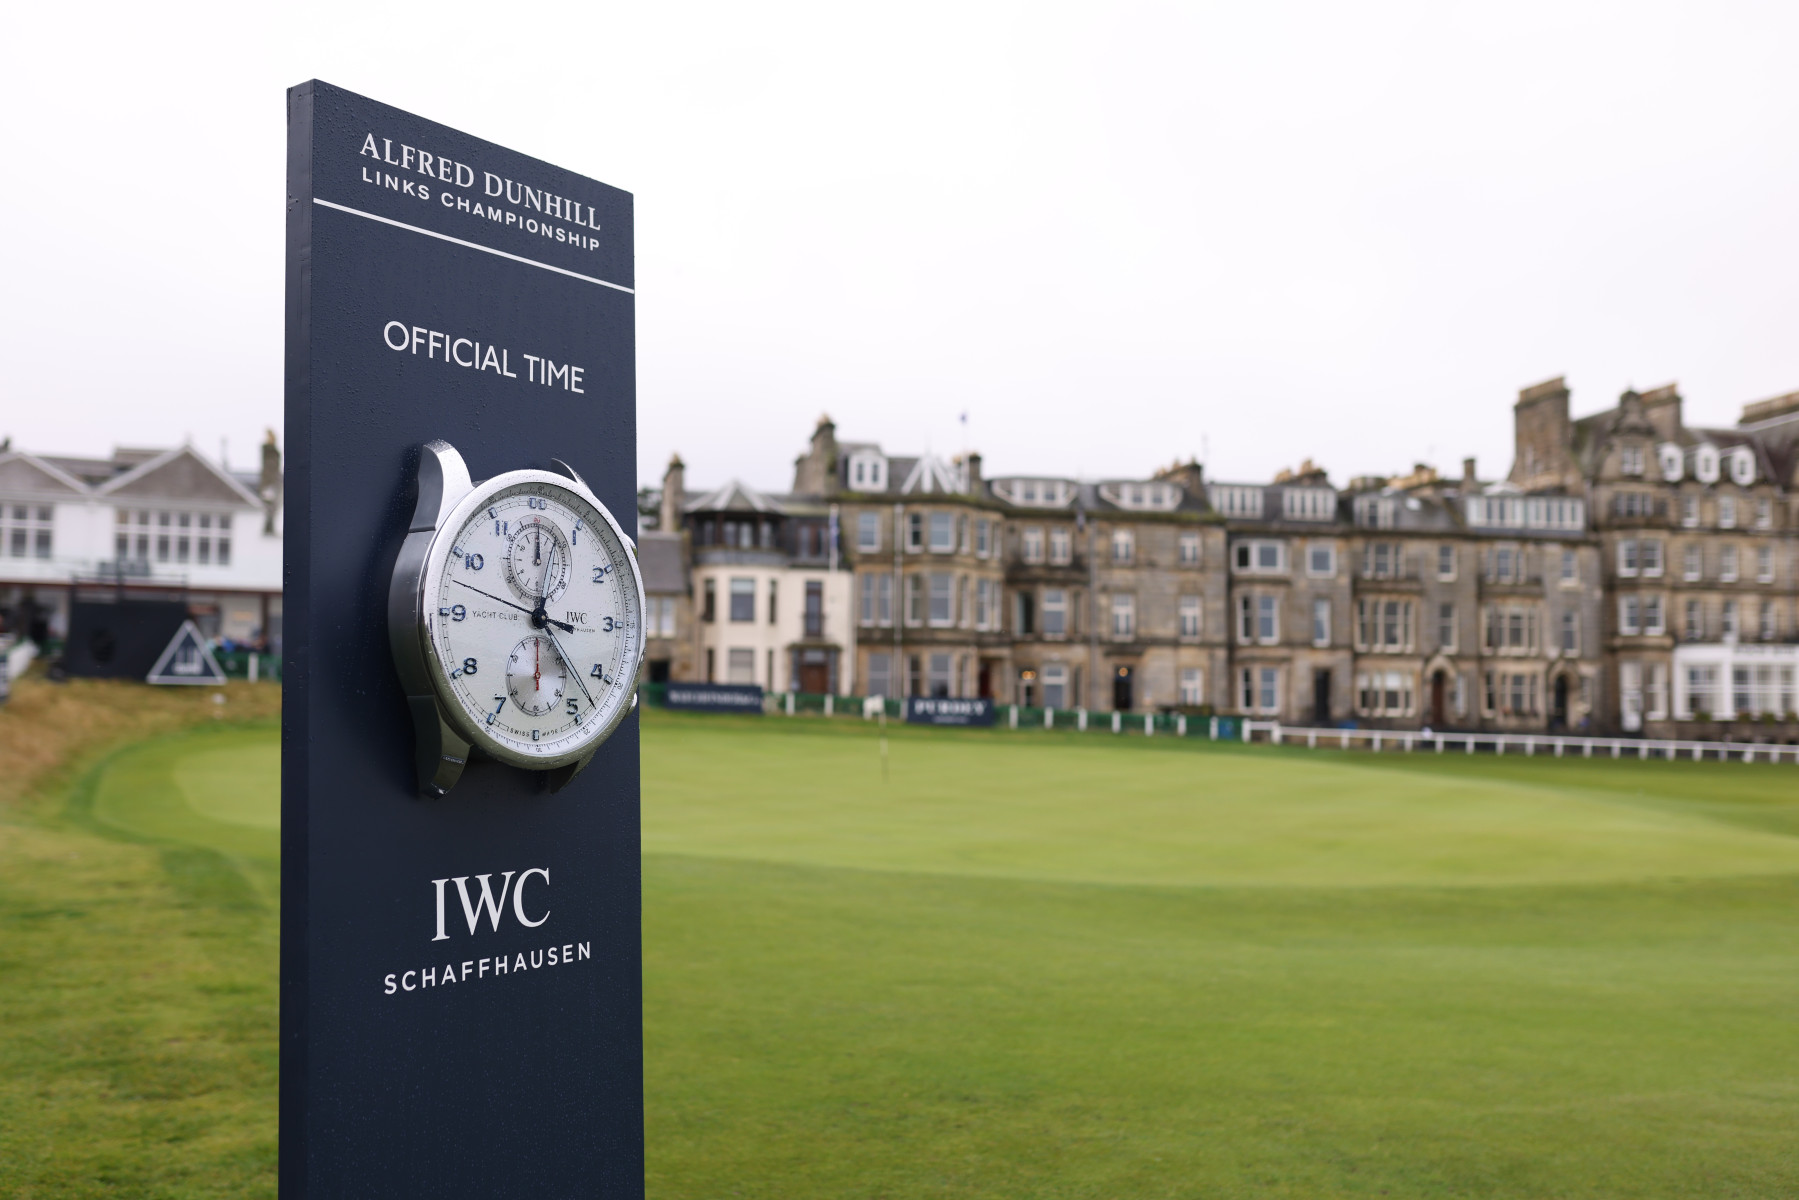 IWC Schaffhausen returns as the official timing partner of the 2023 Alfred Dunhill Links Championship